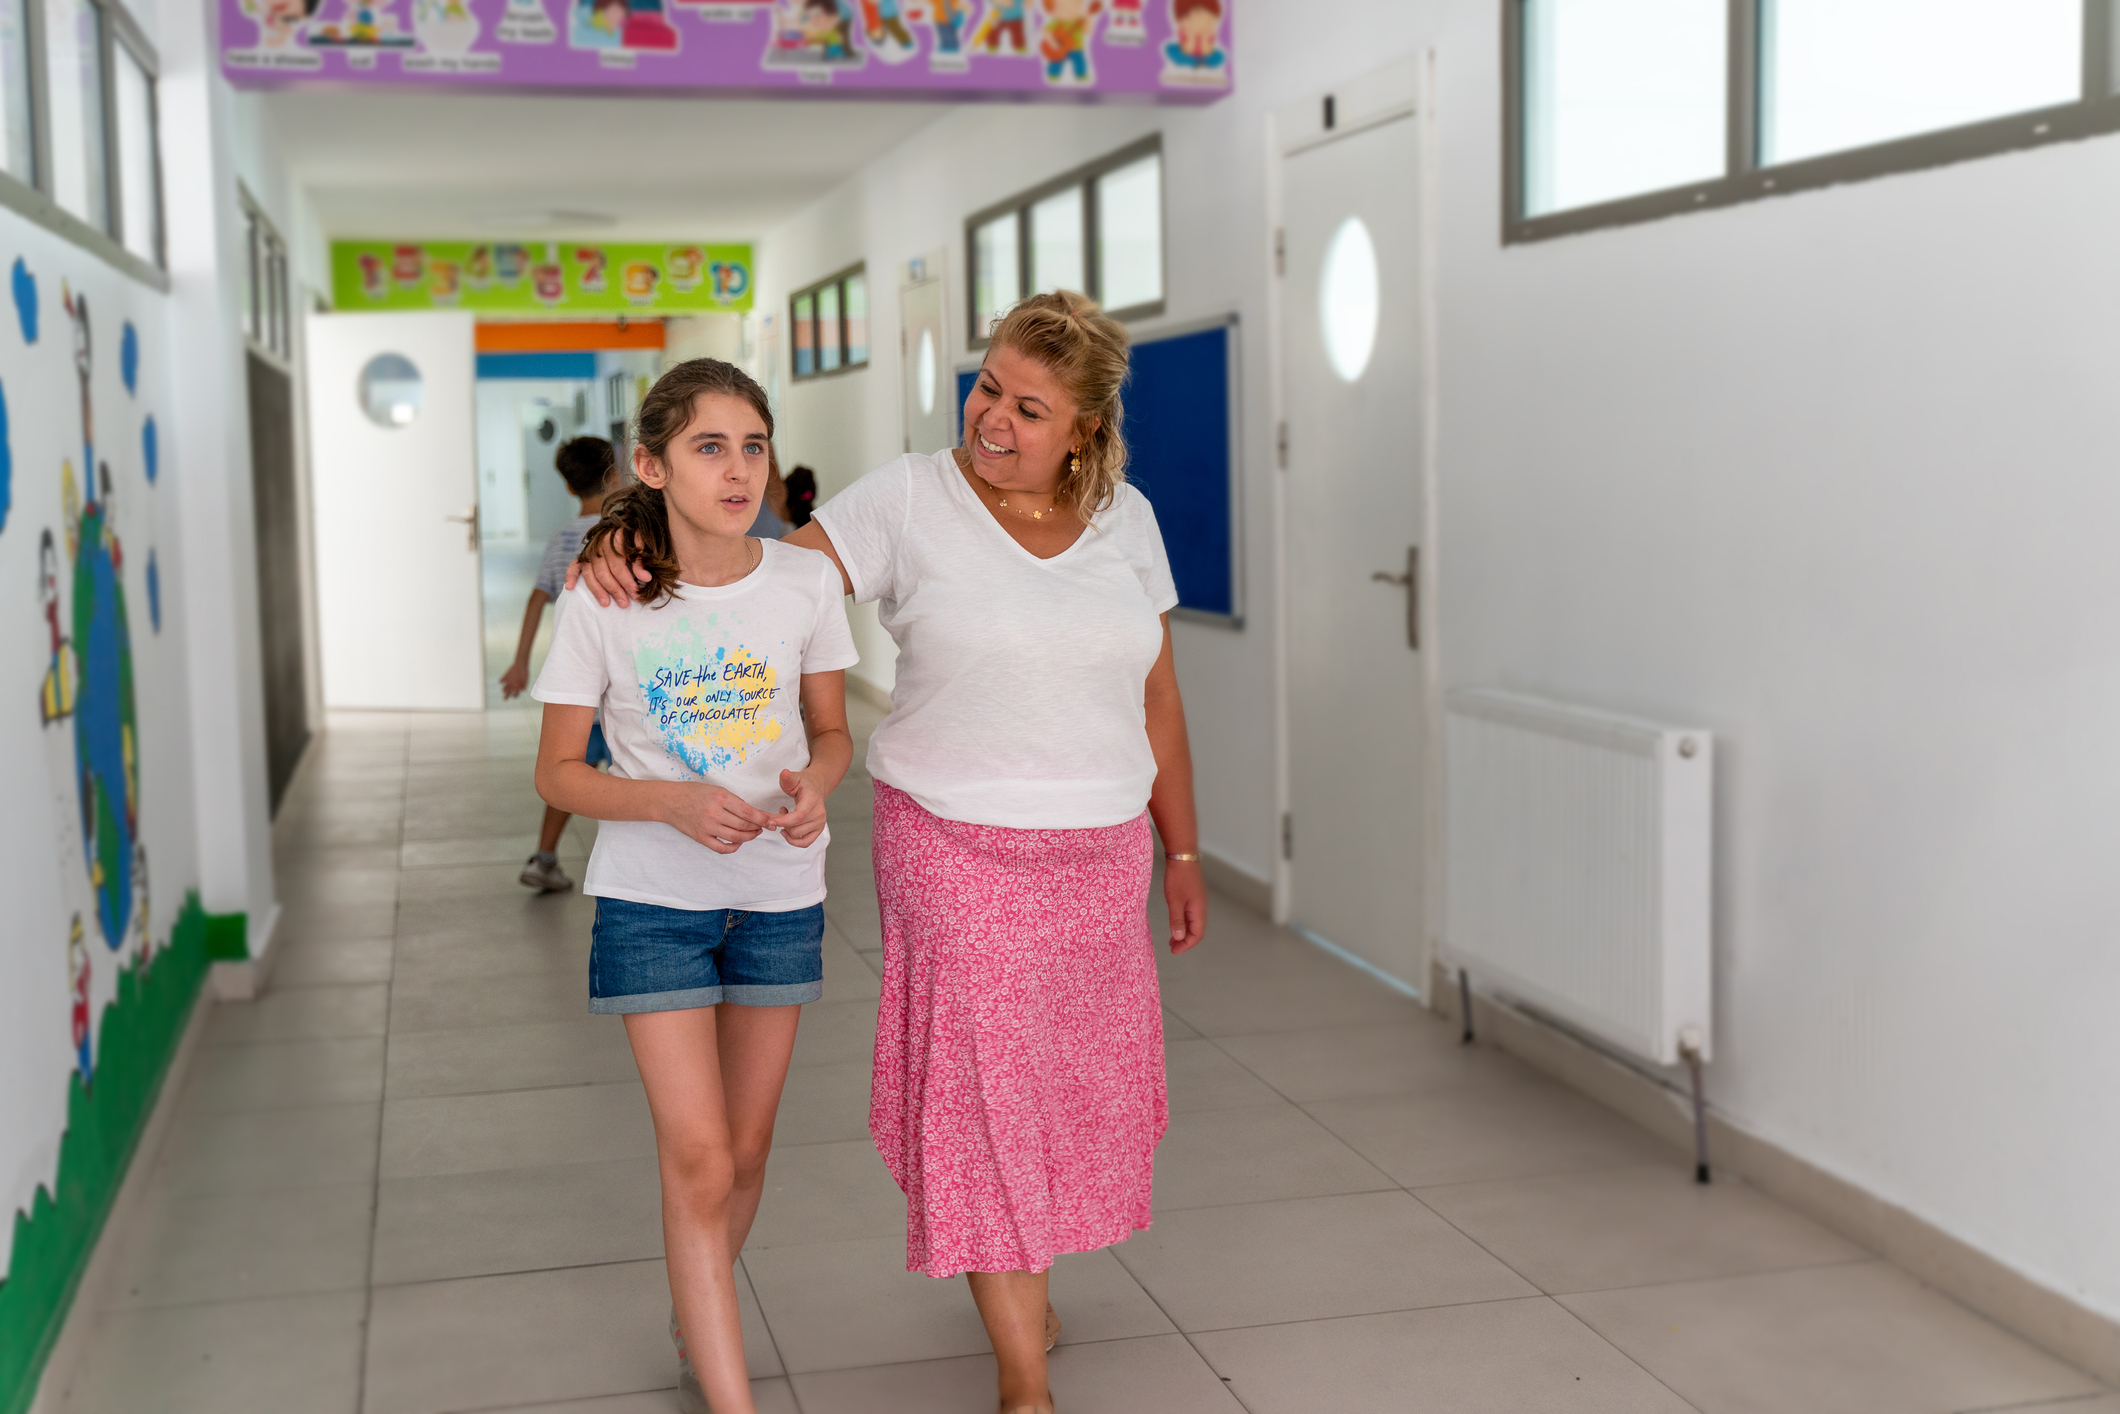 Adult guiding a child through a school hallway, both looking at each other